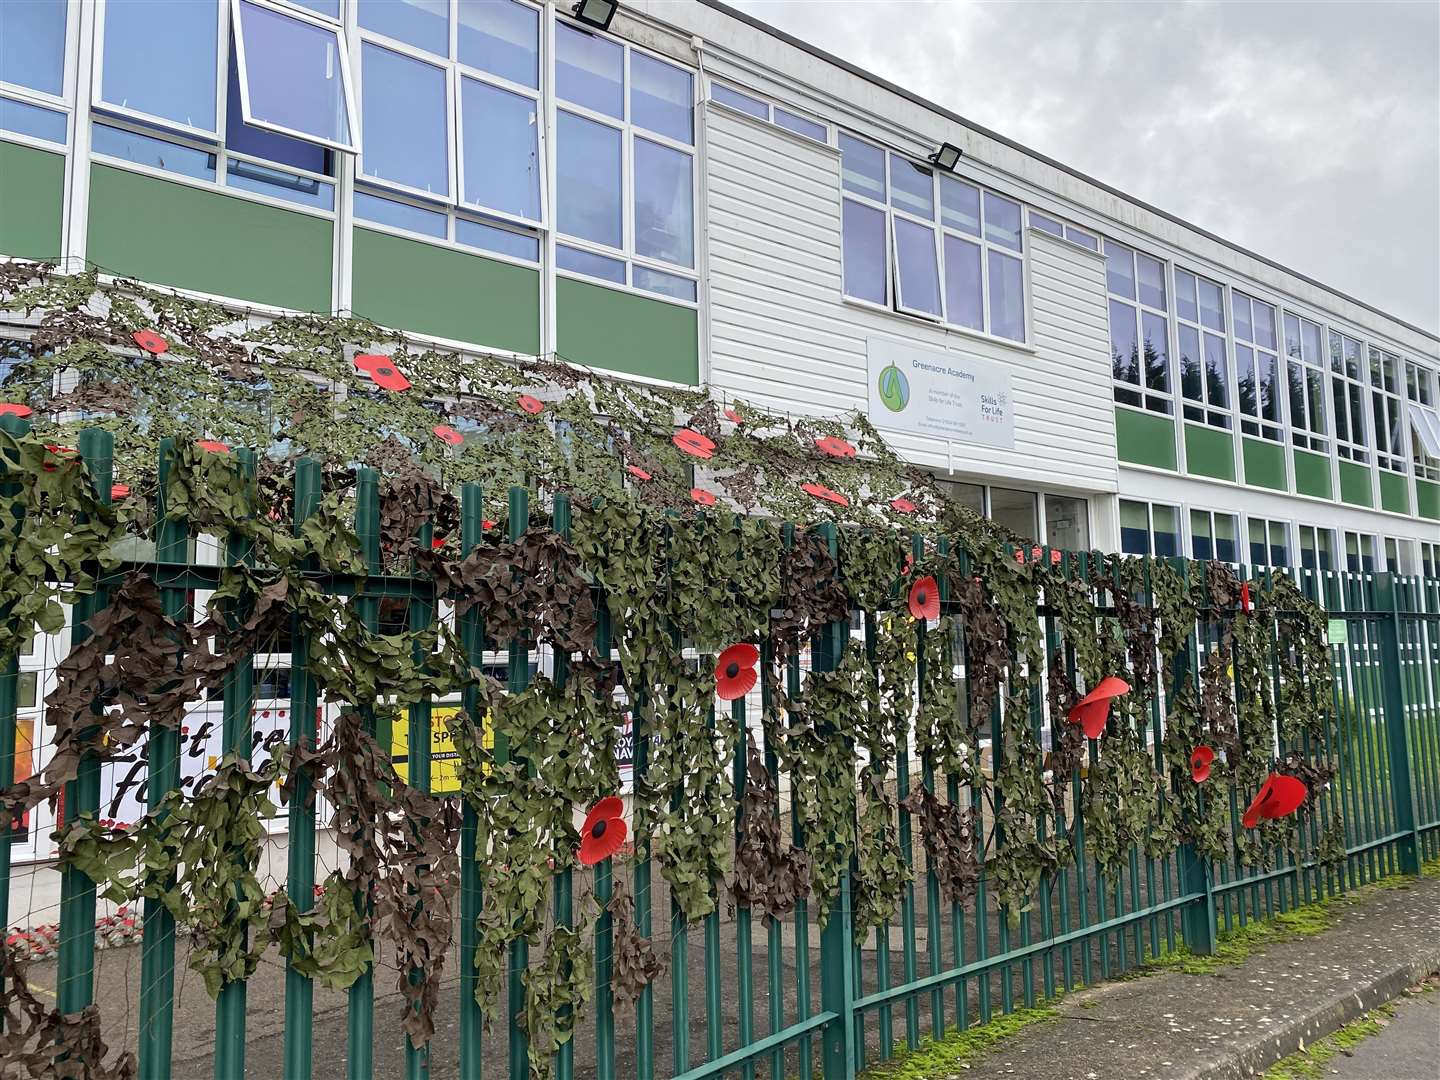 Poppy displays at Warren Wood Primary school, in Rochester. PIcture: Frances Pardell